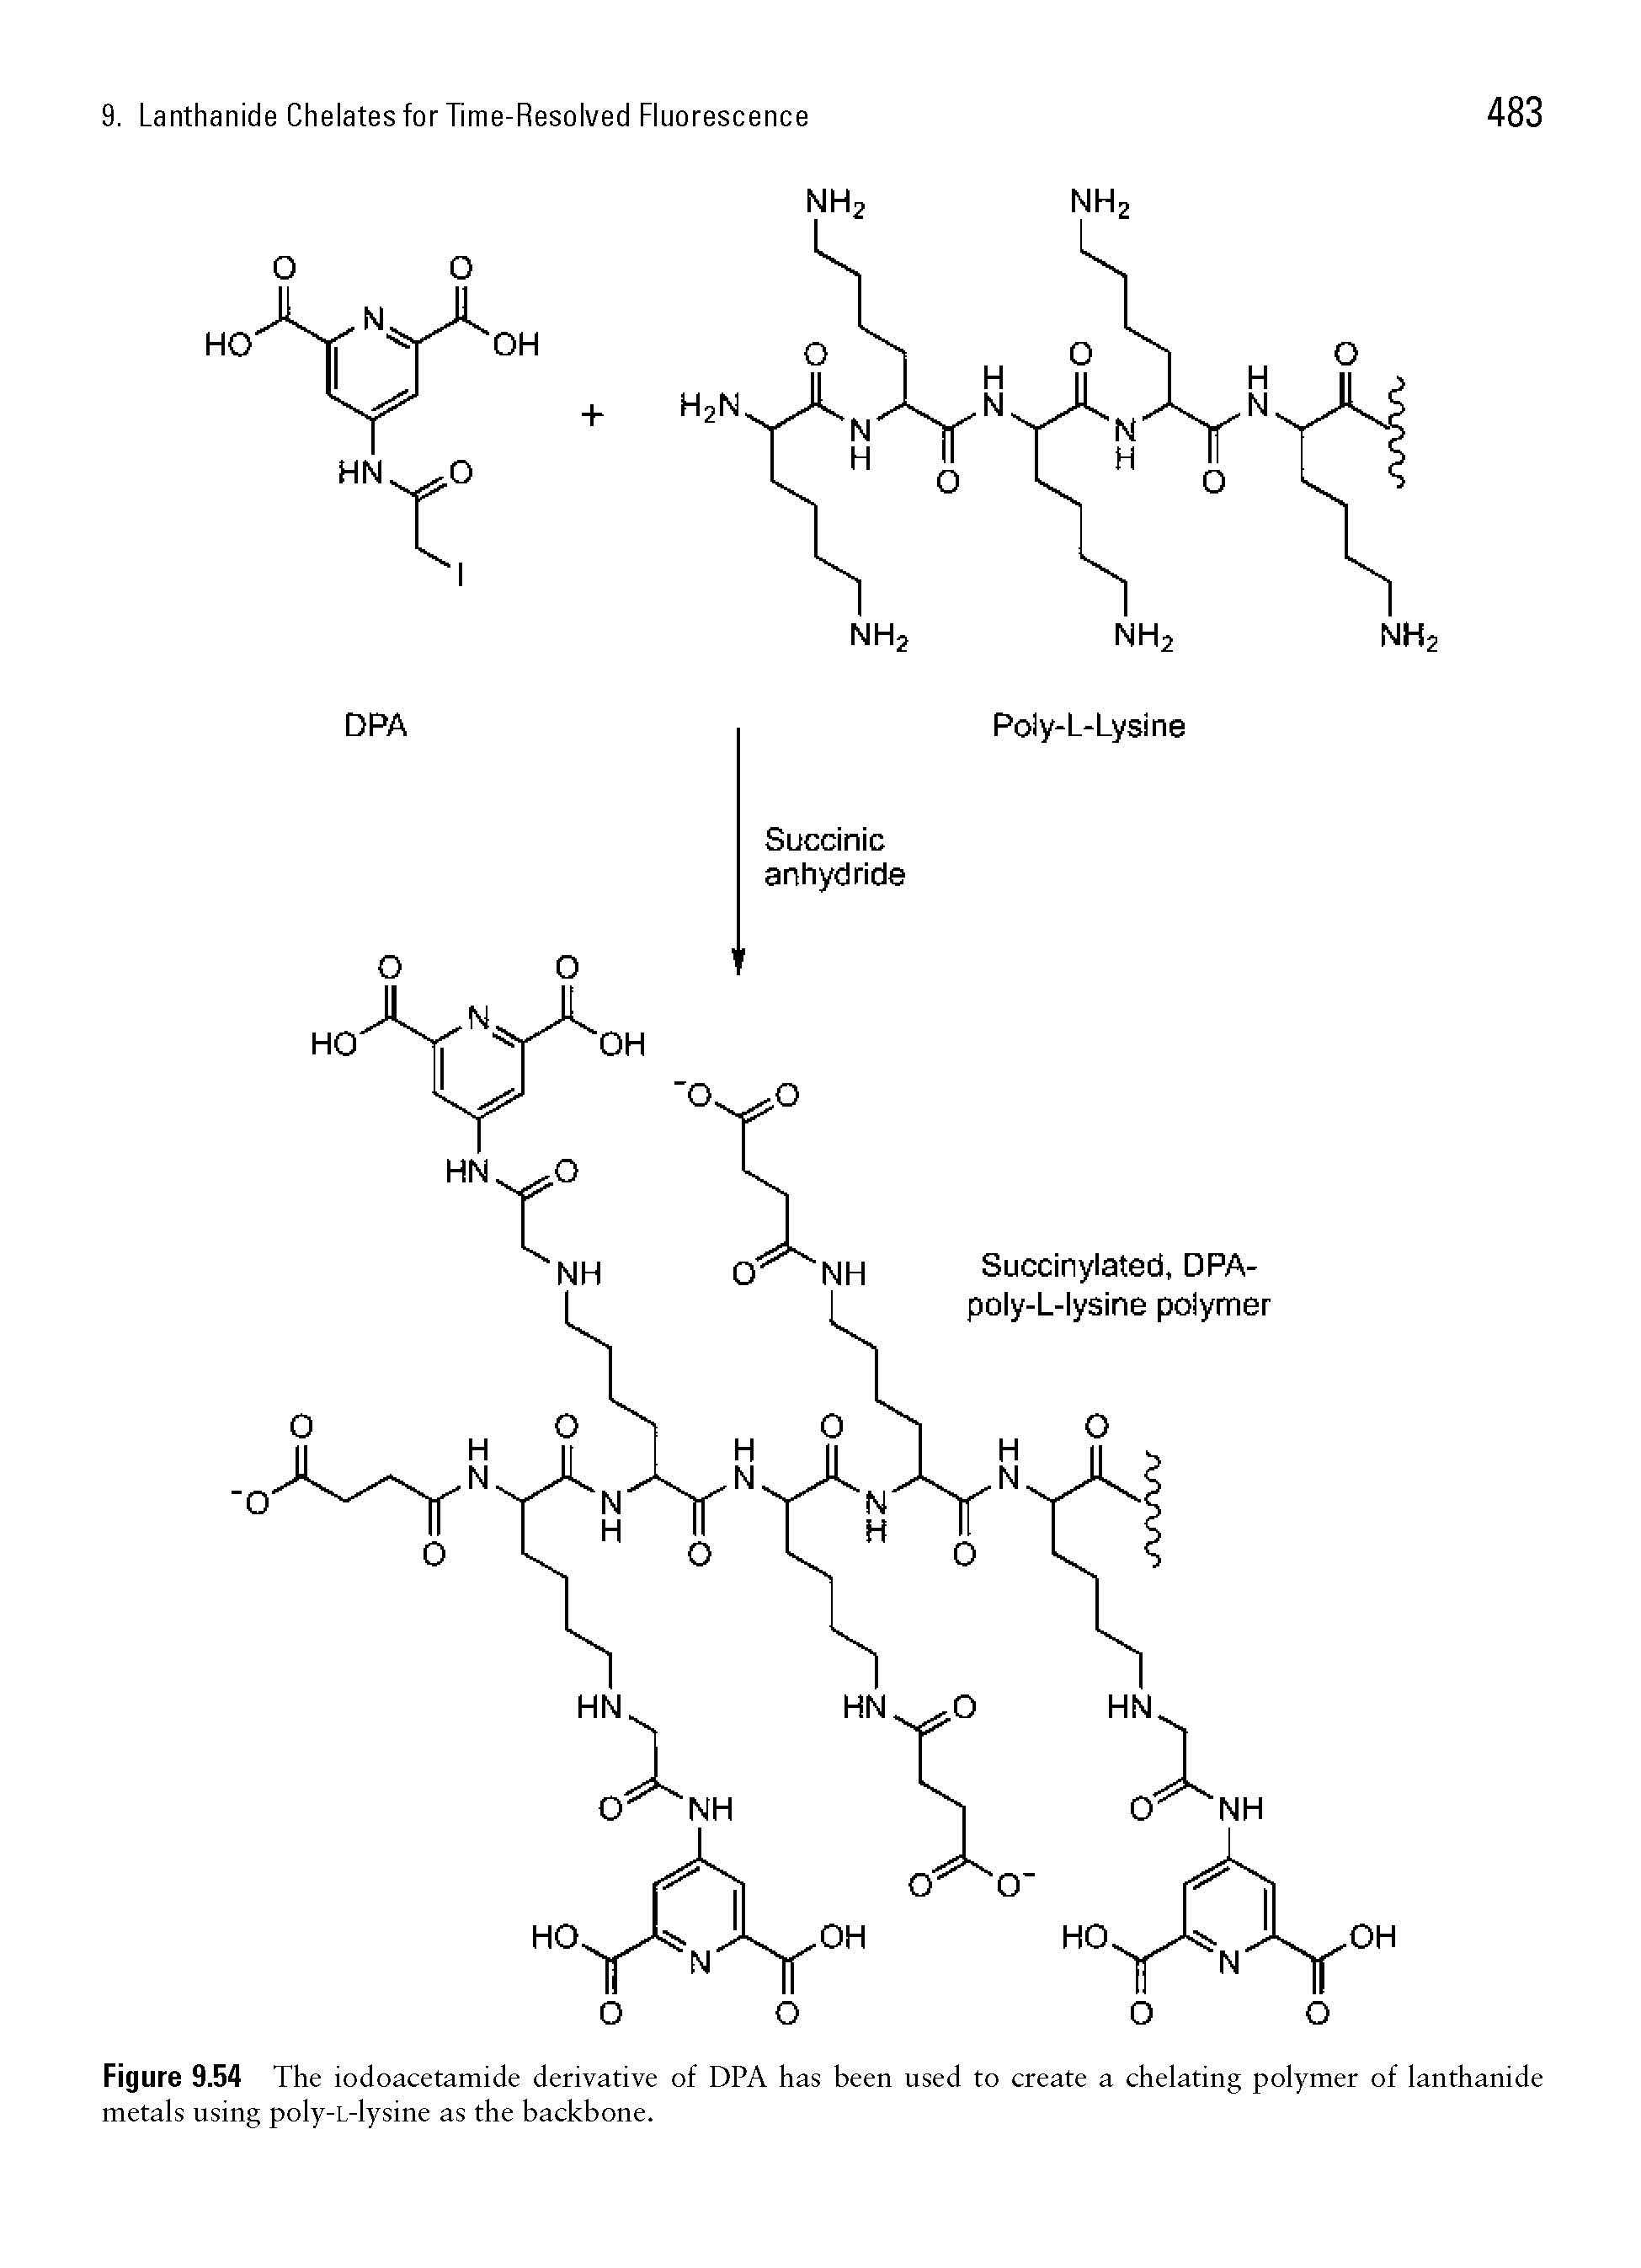 Figure 9.54 The iodoacetamide derivative of DPA has been used to create a chelating polymer of lanthanide metals using poly-L-lysine as the backbone.